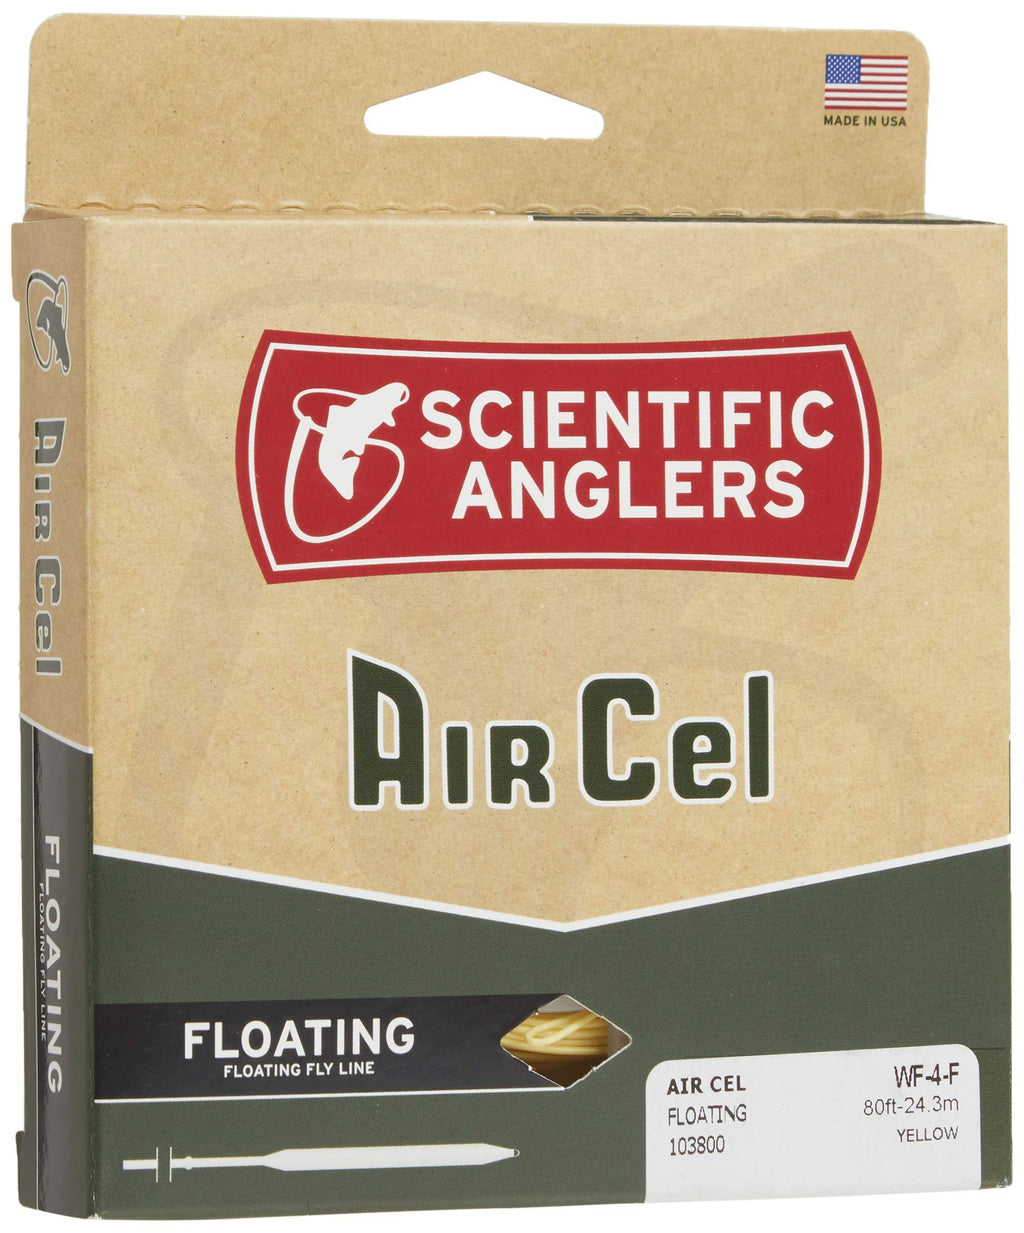 [AUSTRALIA] - Scientific Anglers Air Cel Floating Lines Yellow WF- 6-F 